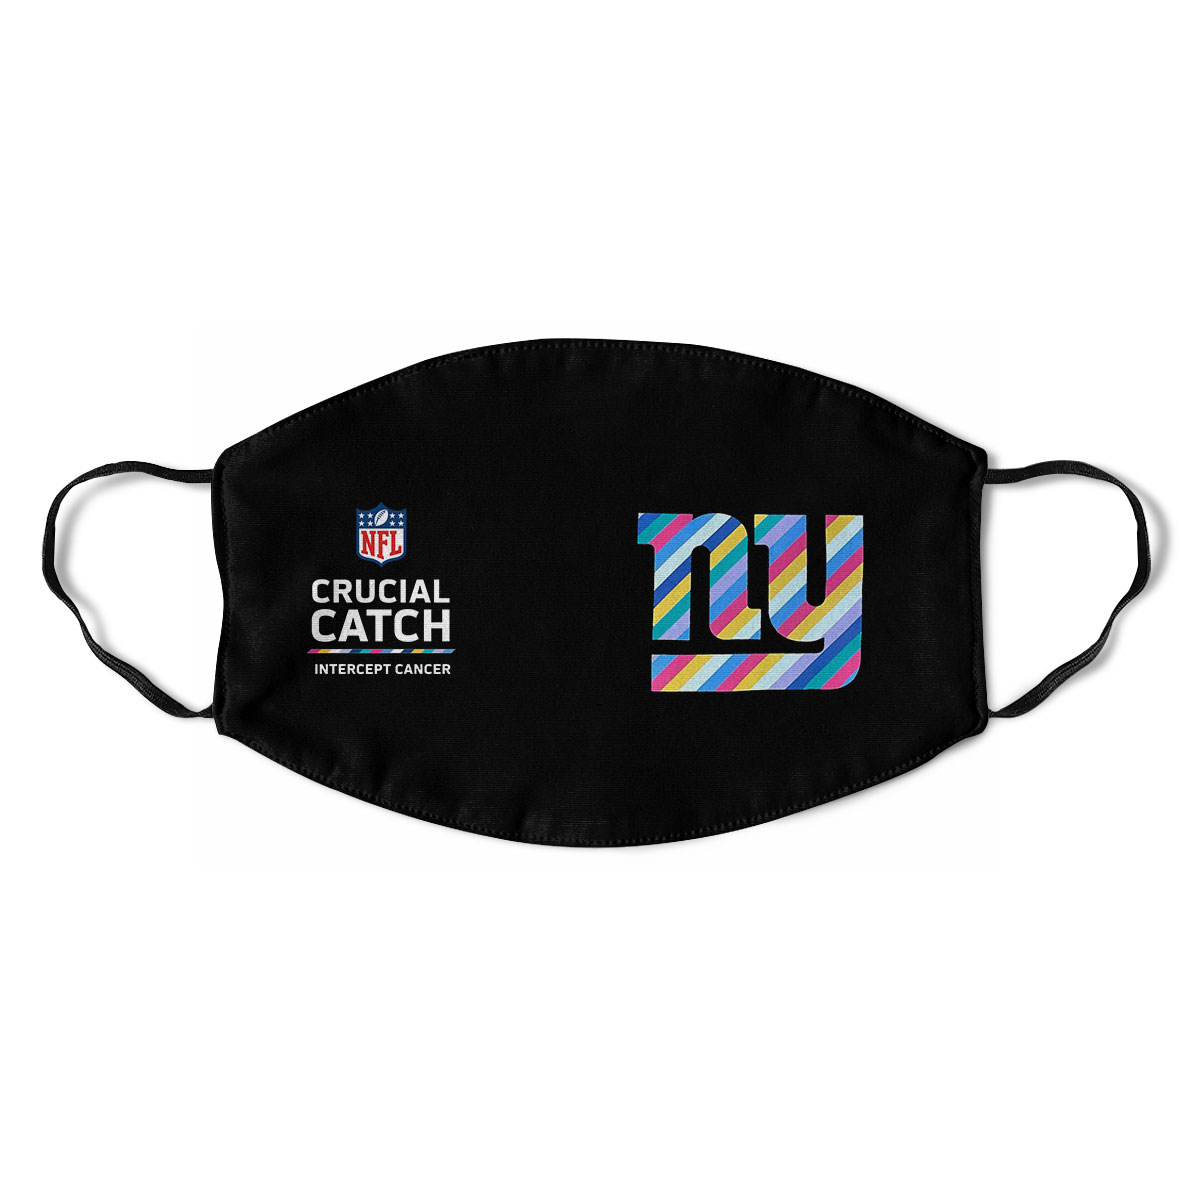 New York Giants Nfl Crucial Catch Multicolor Face Mask